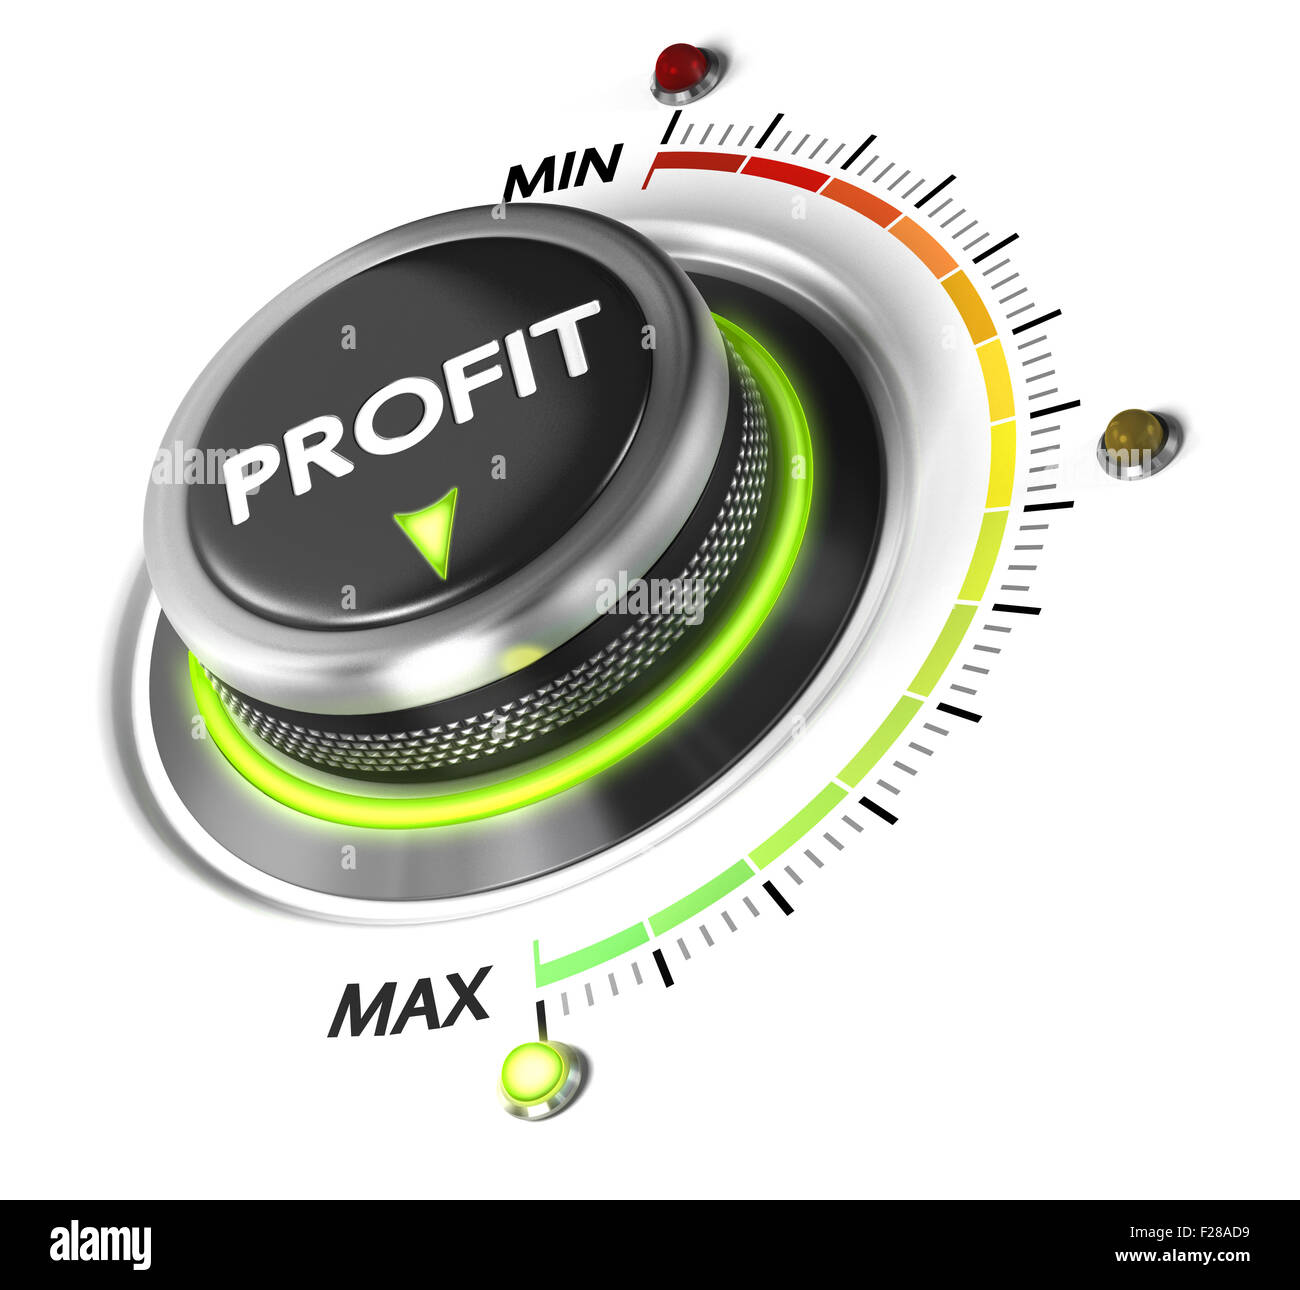 Profit button positioned on maximum, white background and green light. Finance concept illustration of profitability. Stock Photo